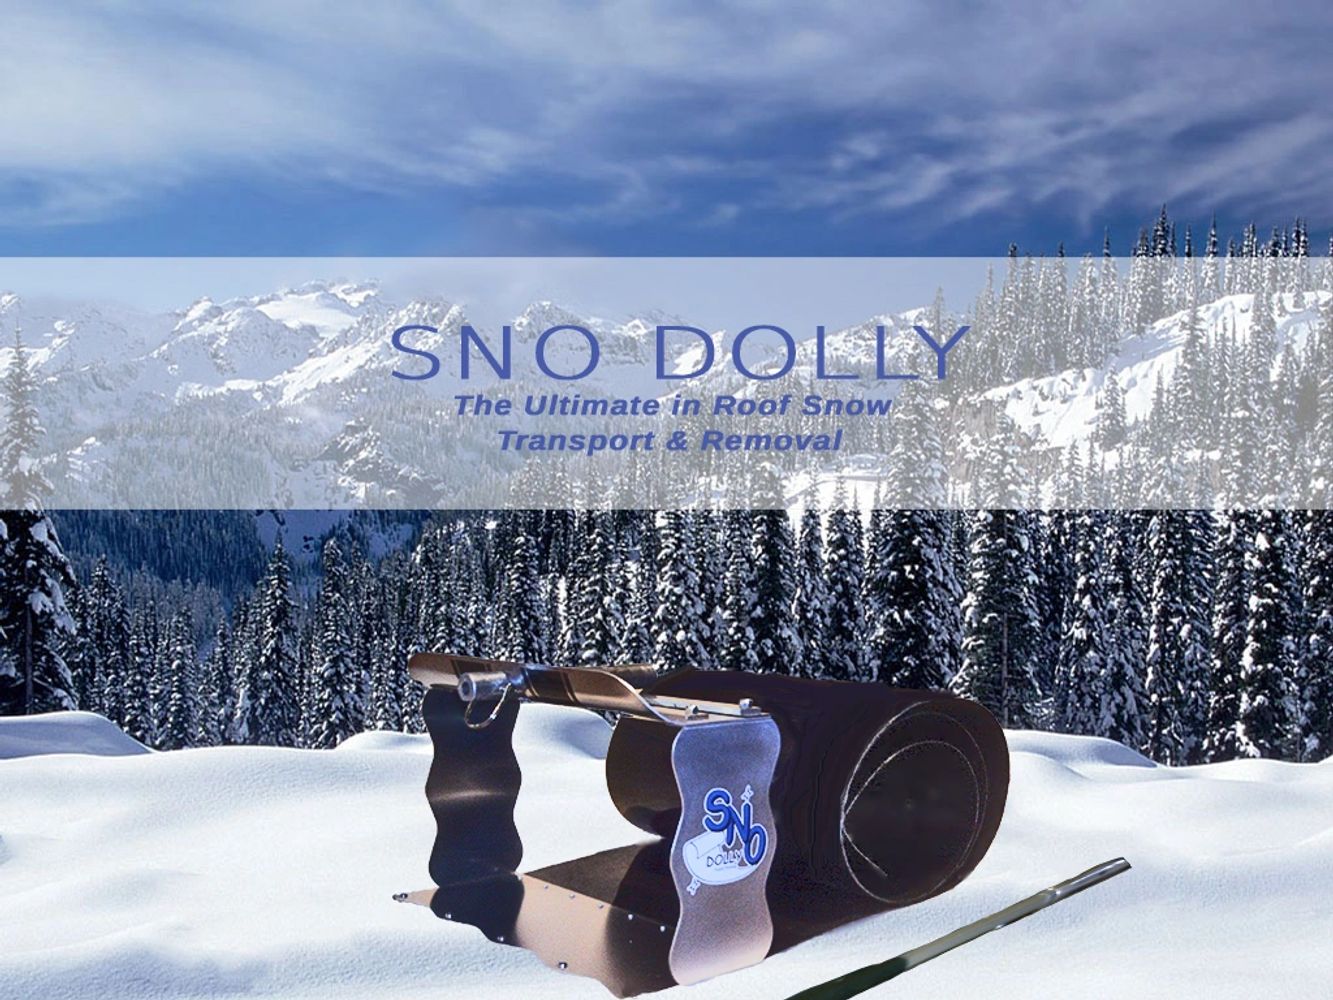 Sno Dolly Snodolly  Ultimate in Roof Snow Transport & Removal  Snow Removal Snow Transport & Removal